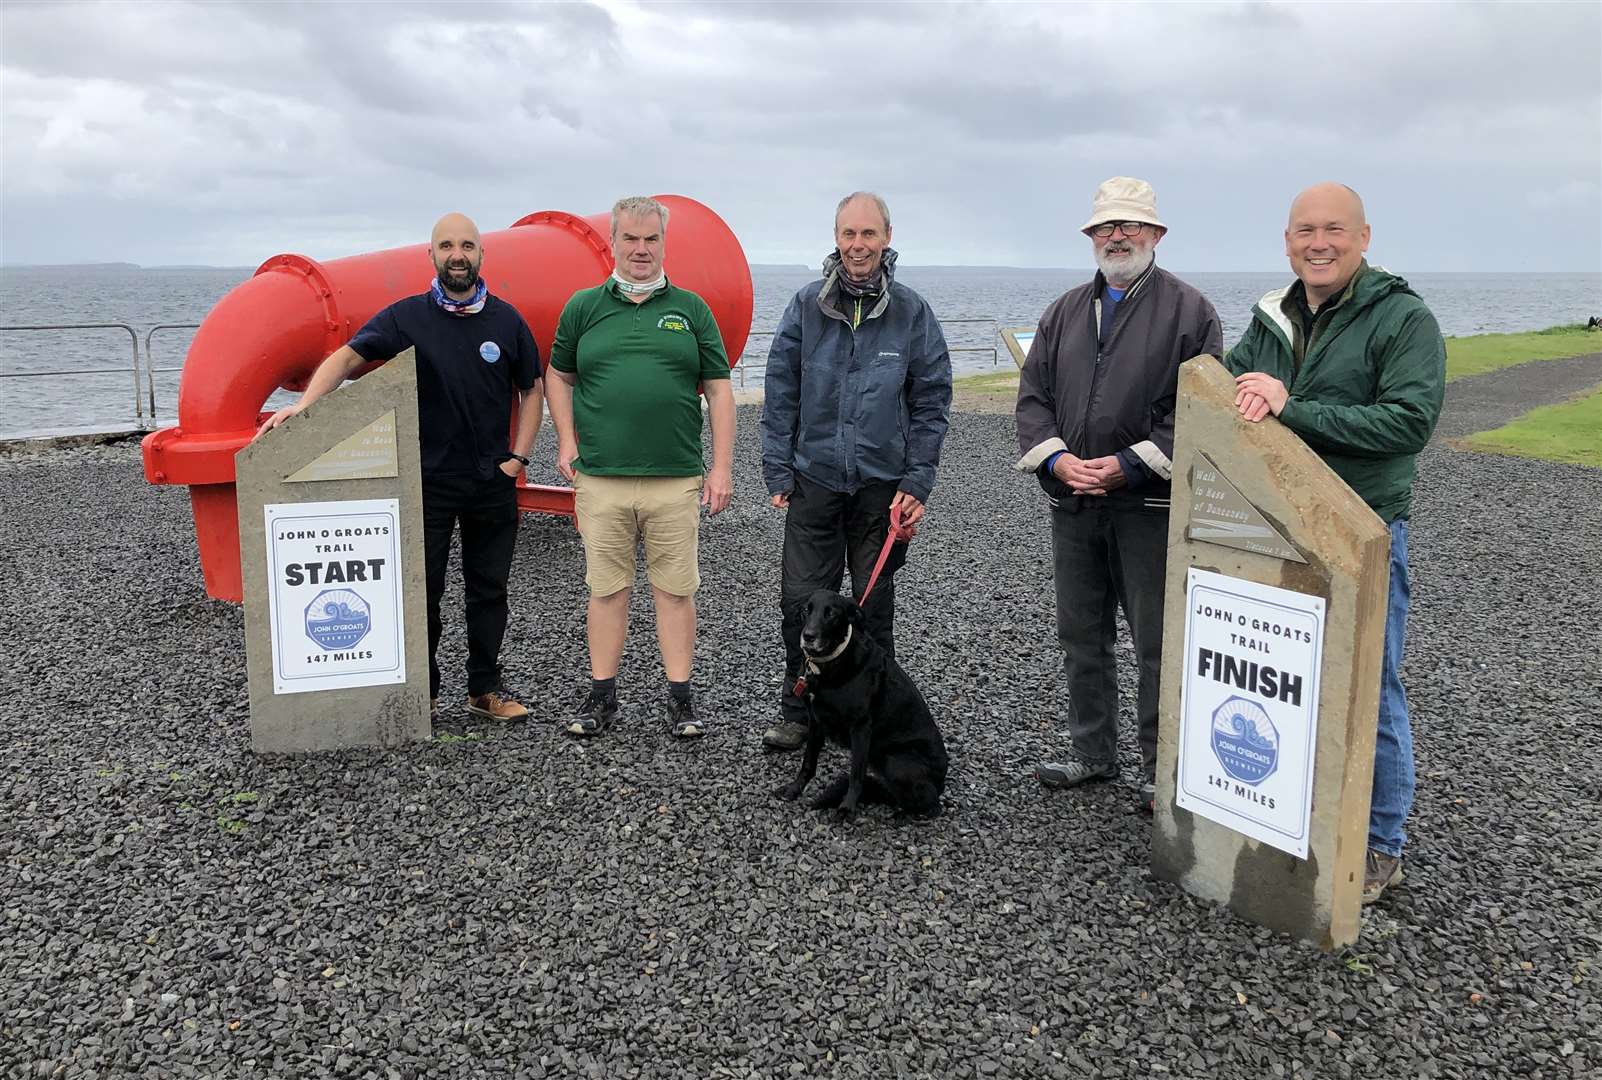 Simon Cottam (left) of John O’Groats Brewery with volunteers from the charity creating the John O’Groats Trail, as well as the North Coast Trail which extends to Cape Wrath – Derek Bremner, Charlie Bain, Ian Ellis and Jay Wilson.